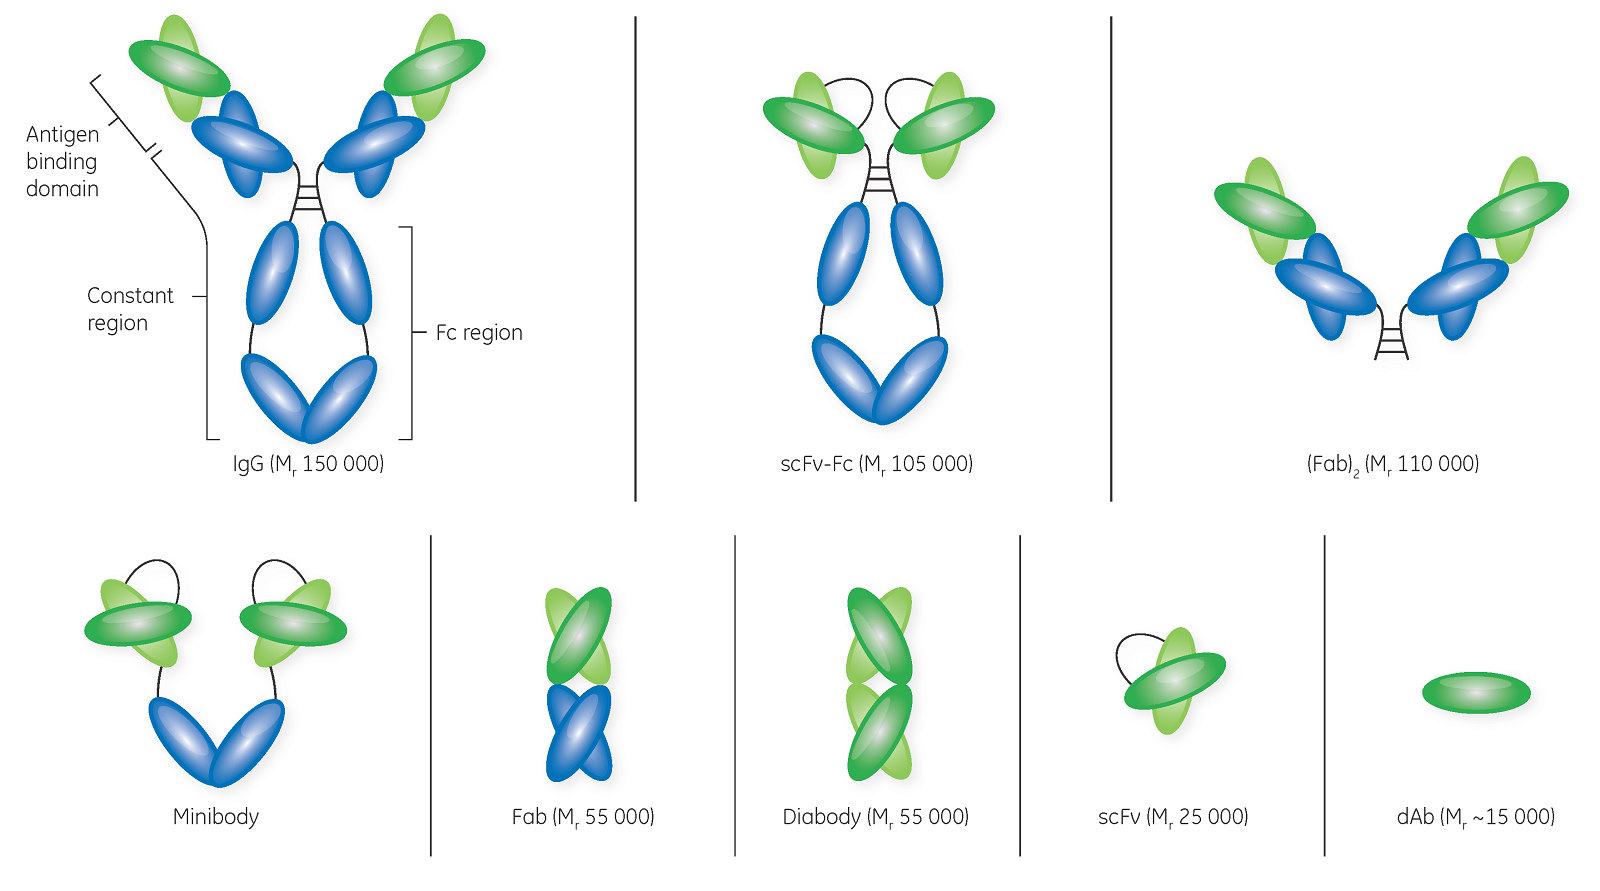 Protein engineering technologies are producing increasingly diverse therapeutic proteins such as whole antibodies, antibody fragments, and fusion proteins like bispecific antibodies.